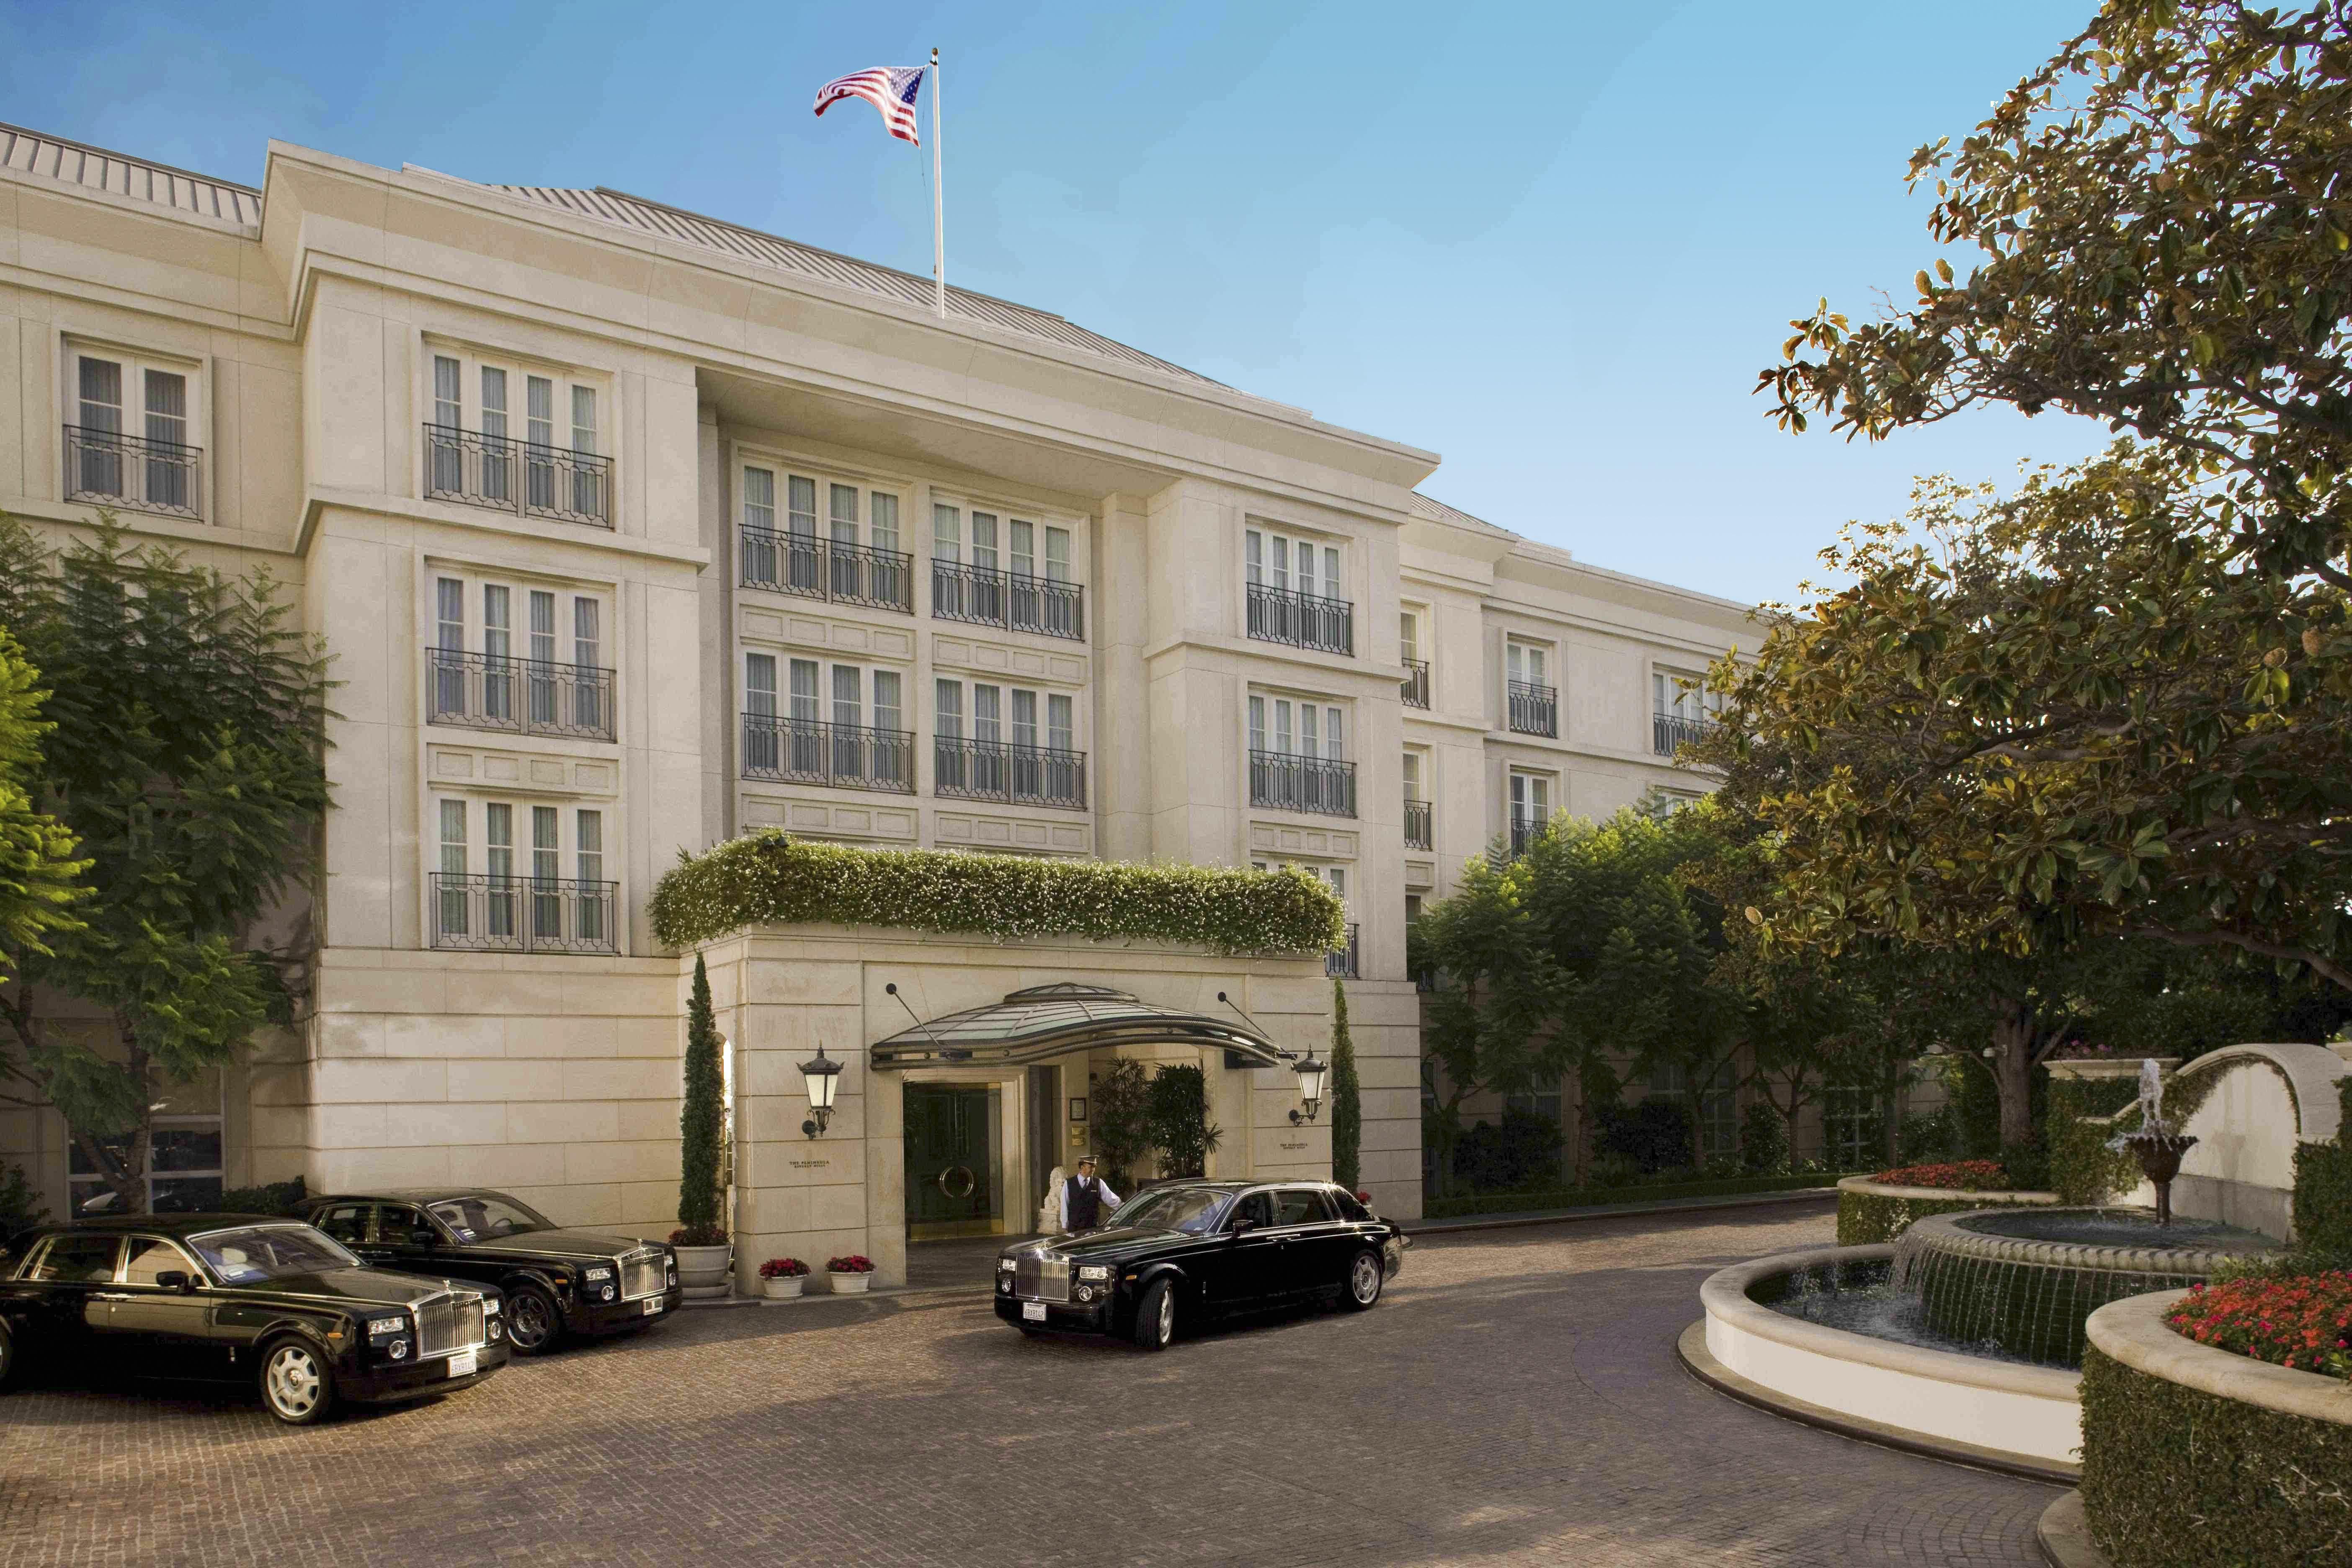 The Peninsula Beverly Hills Los Angeles Exterior foto